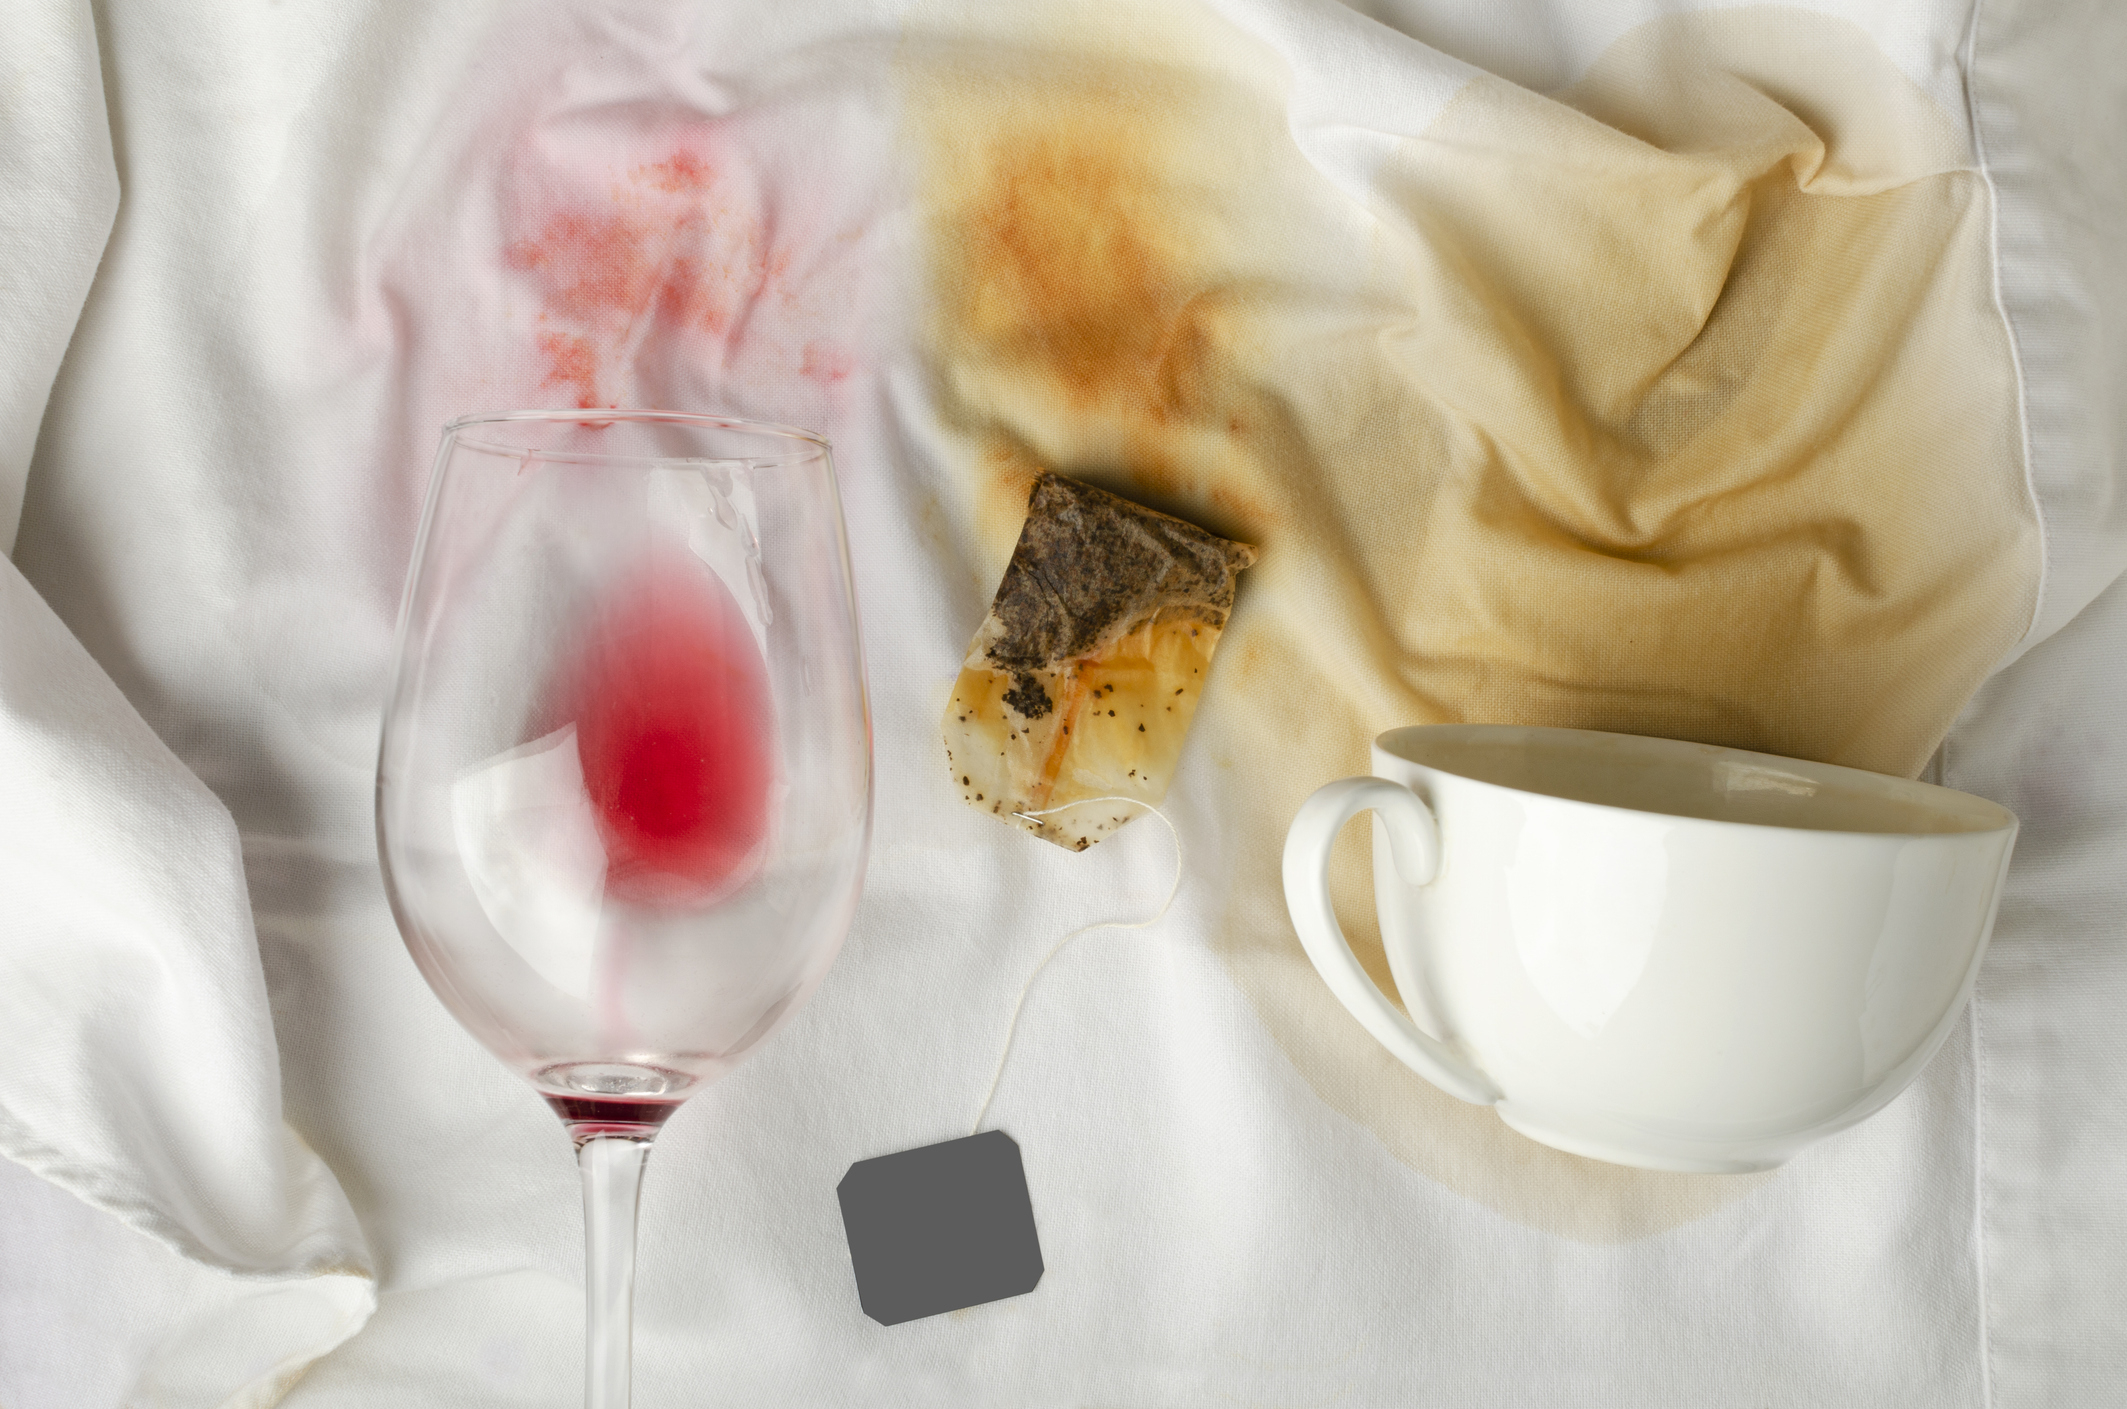 A spilled glass of wine next to a tea bag on a bed, portraying a minor domestic accident